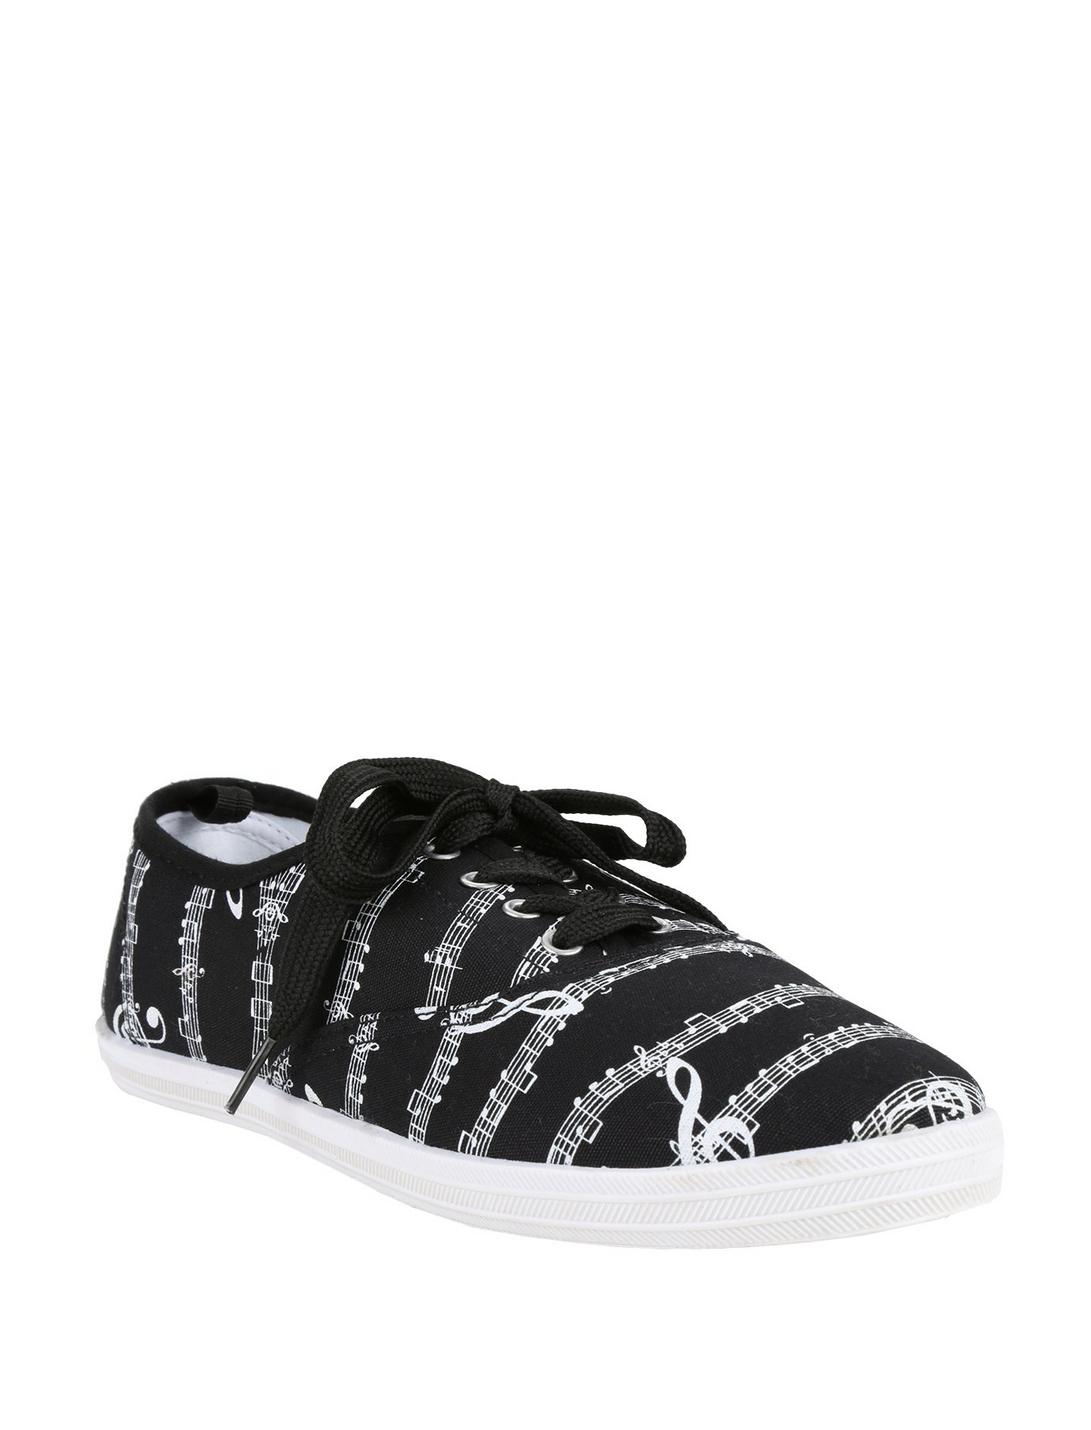 Music Notes Lace-Up Sneakers, BLACK, hi-res